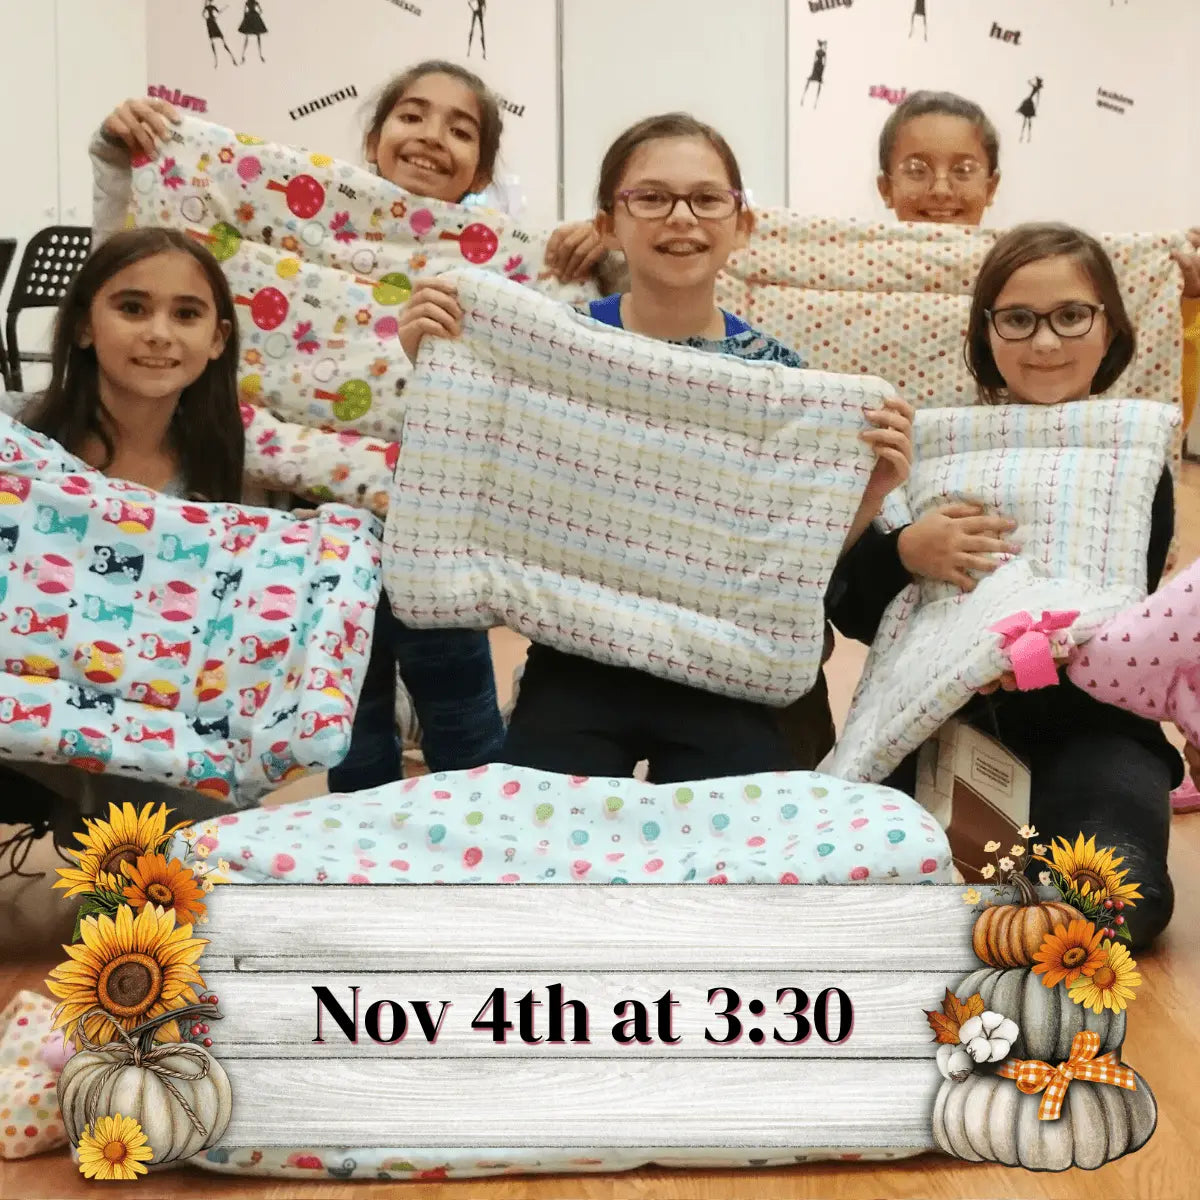 November Craft: Sew & Donate a Pet Bed for Animal Shelter